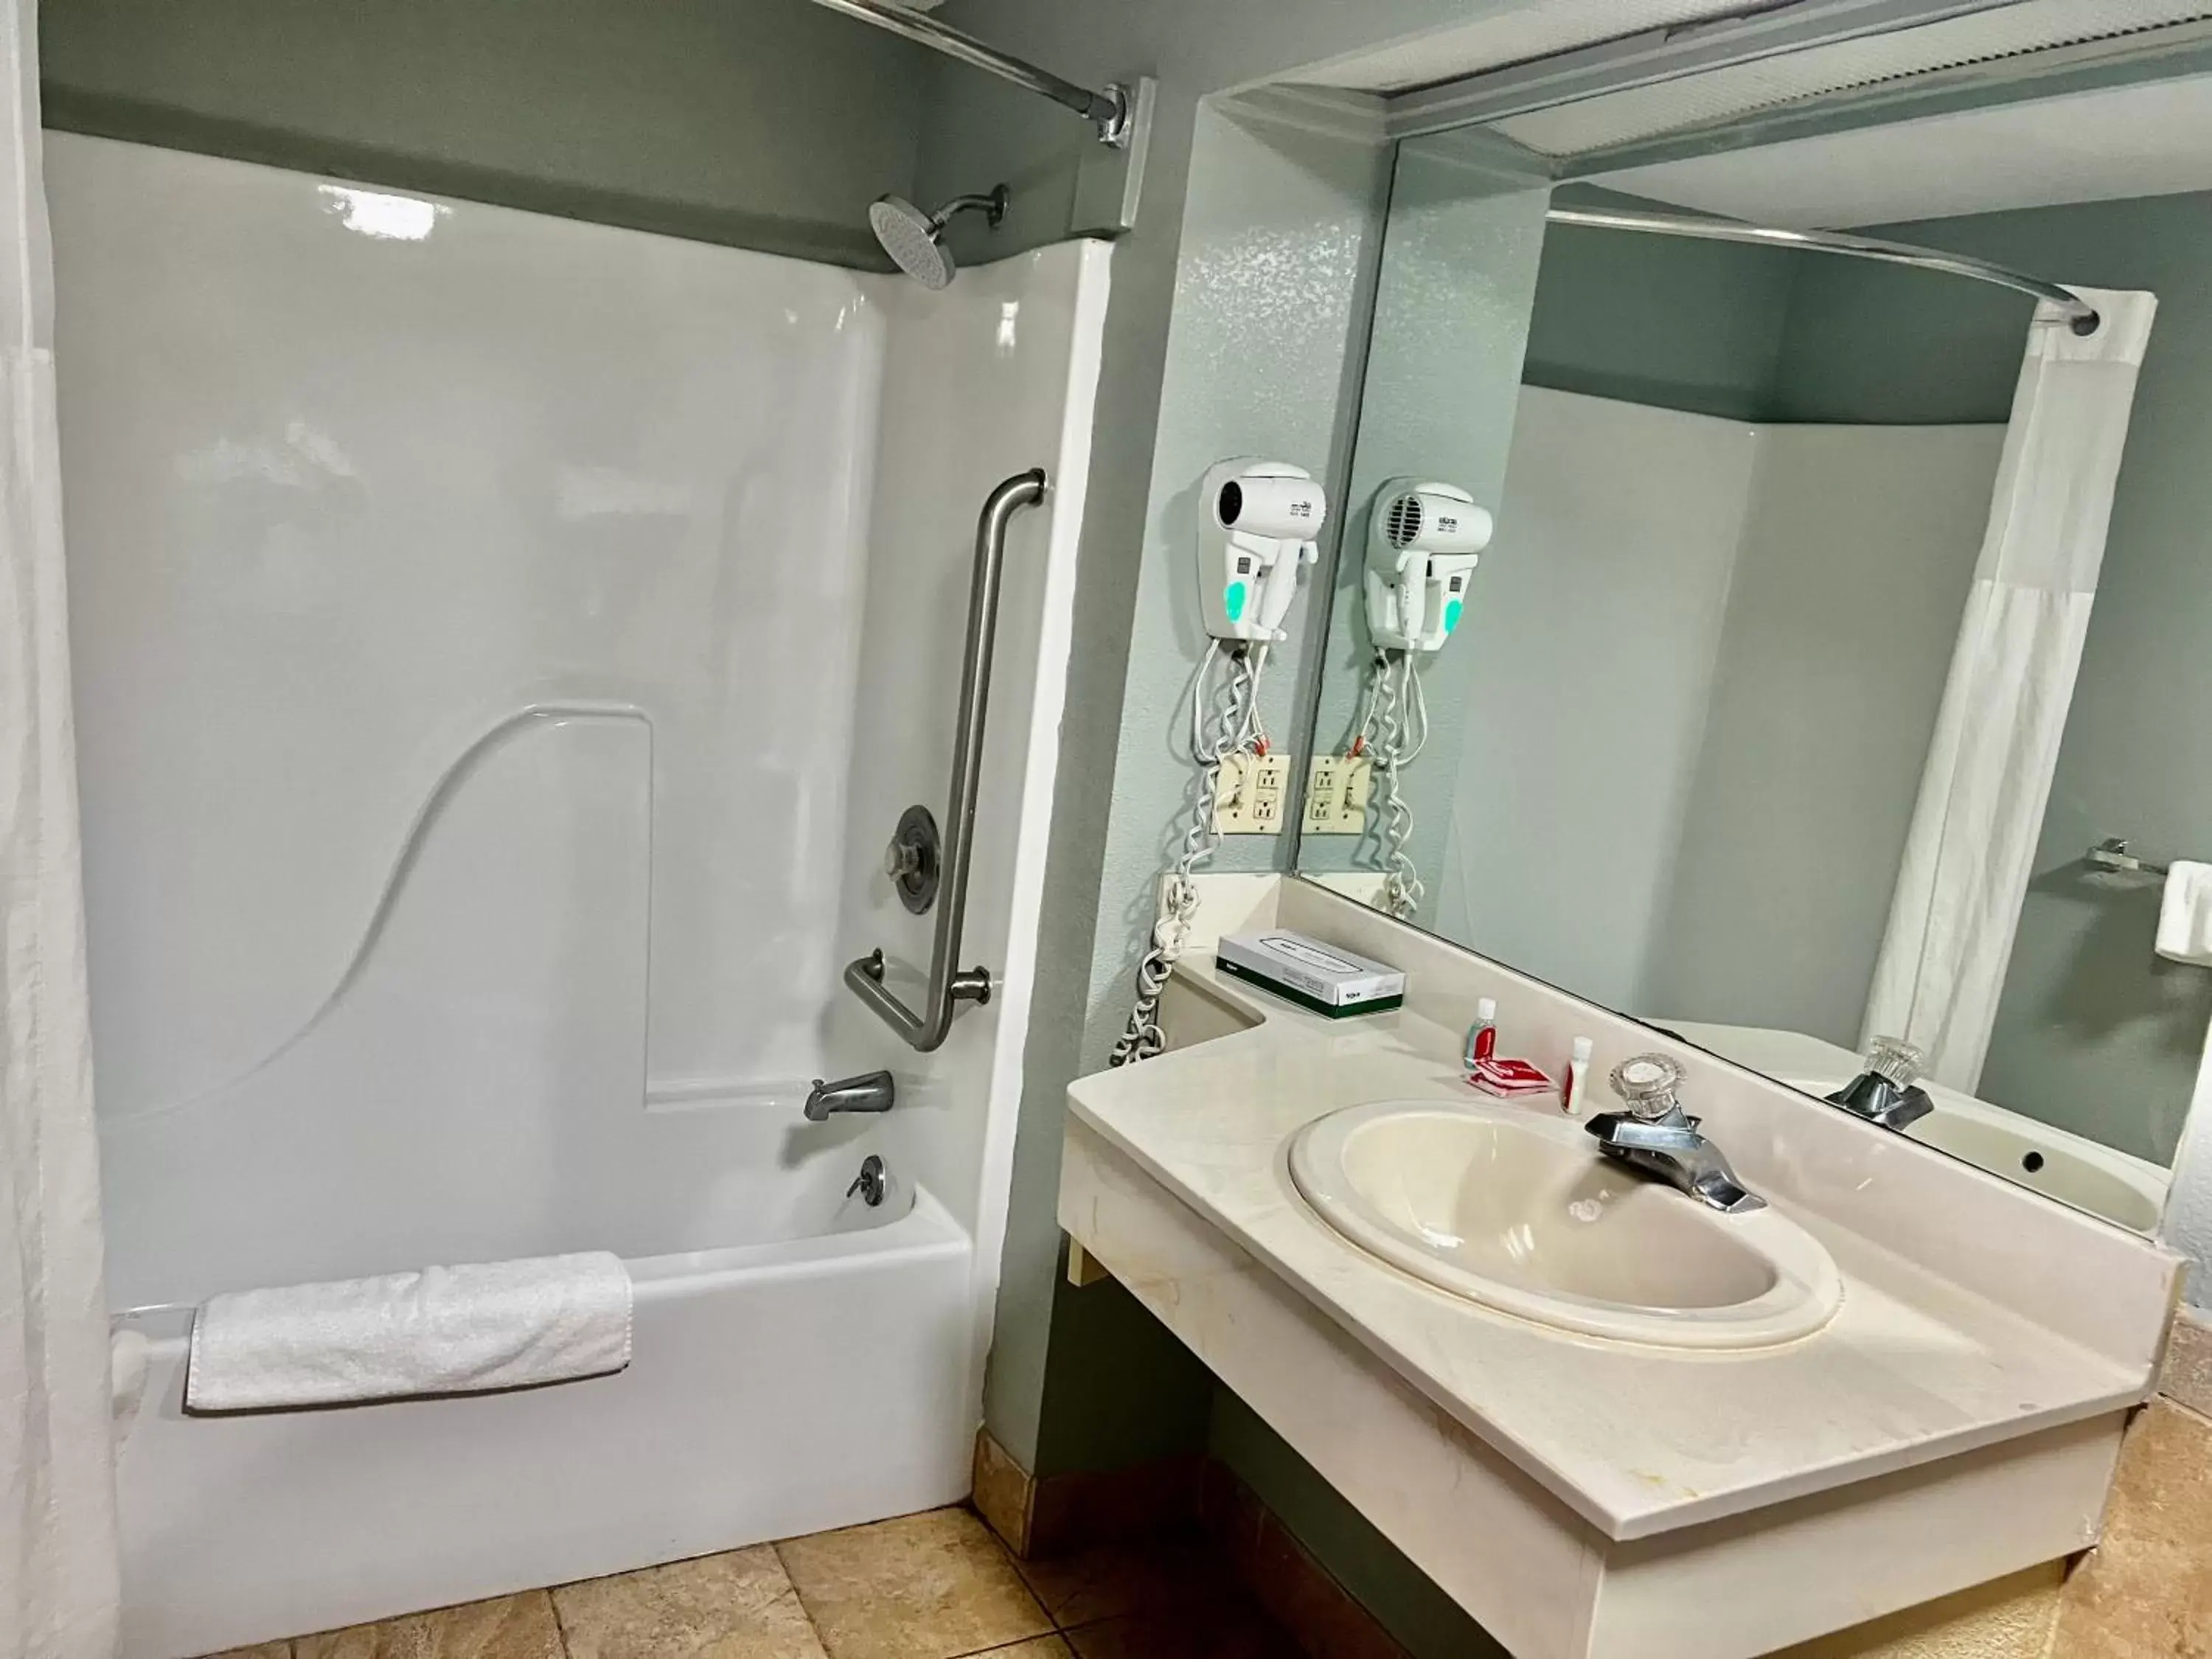 Facility for disabled guests, Bathroom in Econo Lodge Sanford NC